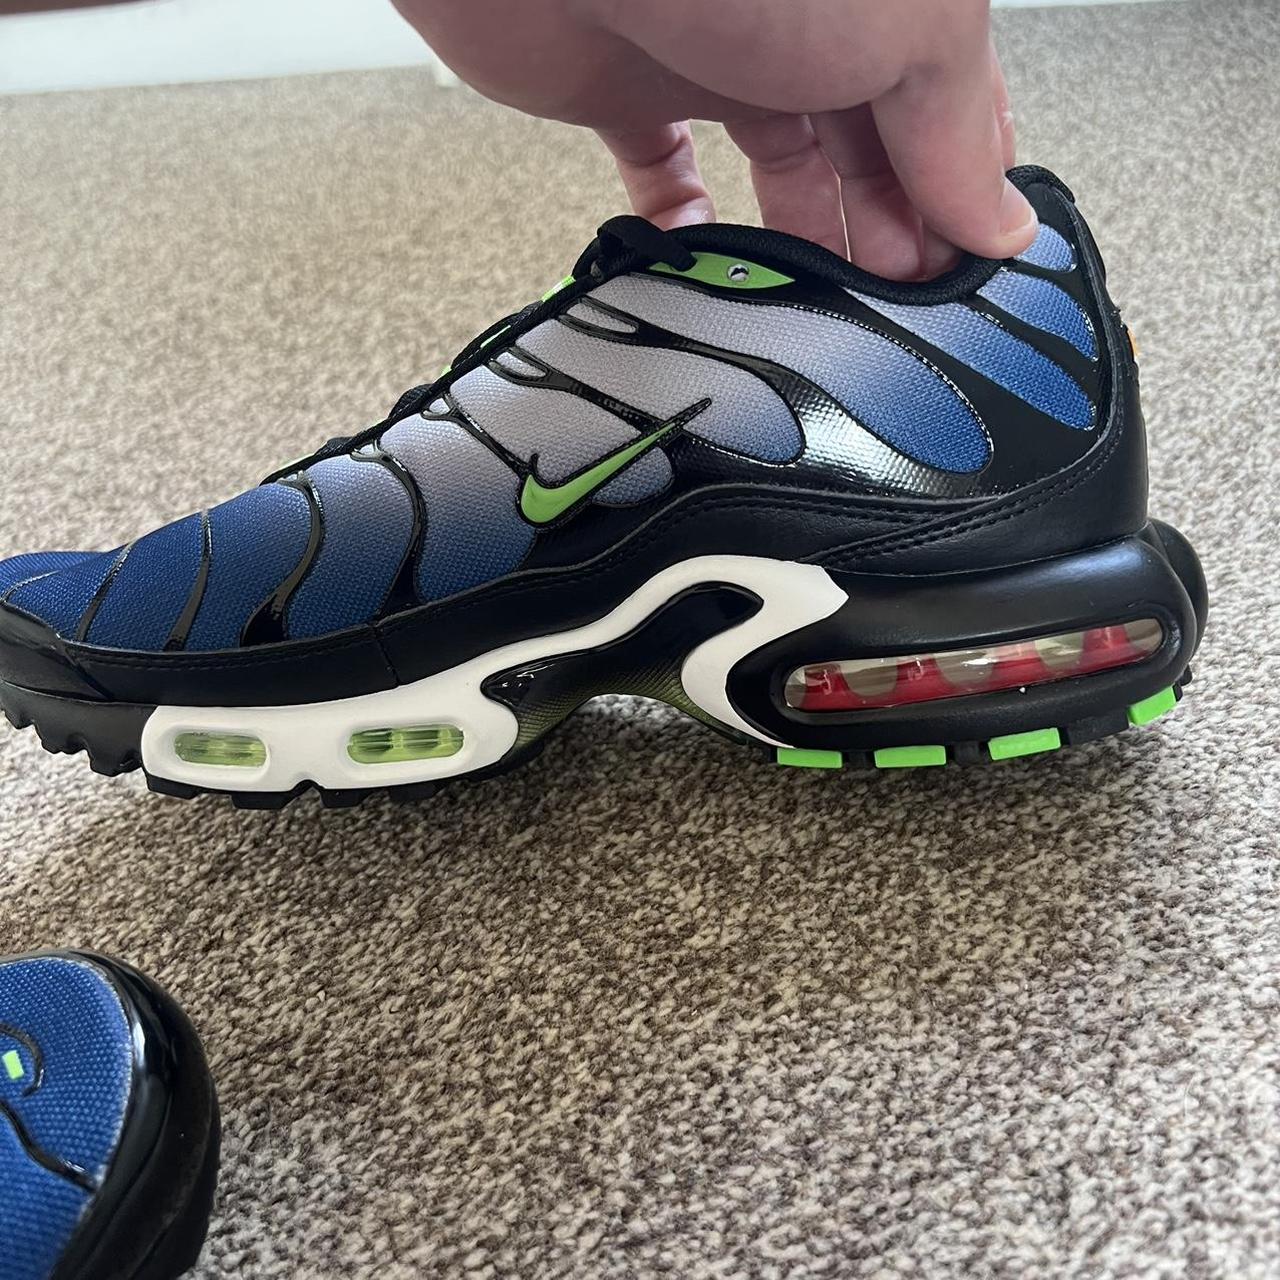 Nike air max plus TN - no box included / just the... - Depop